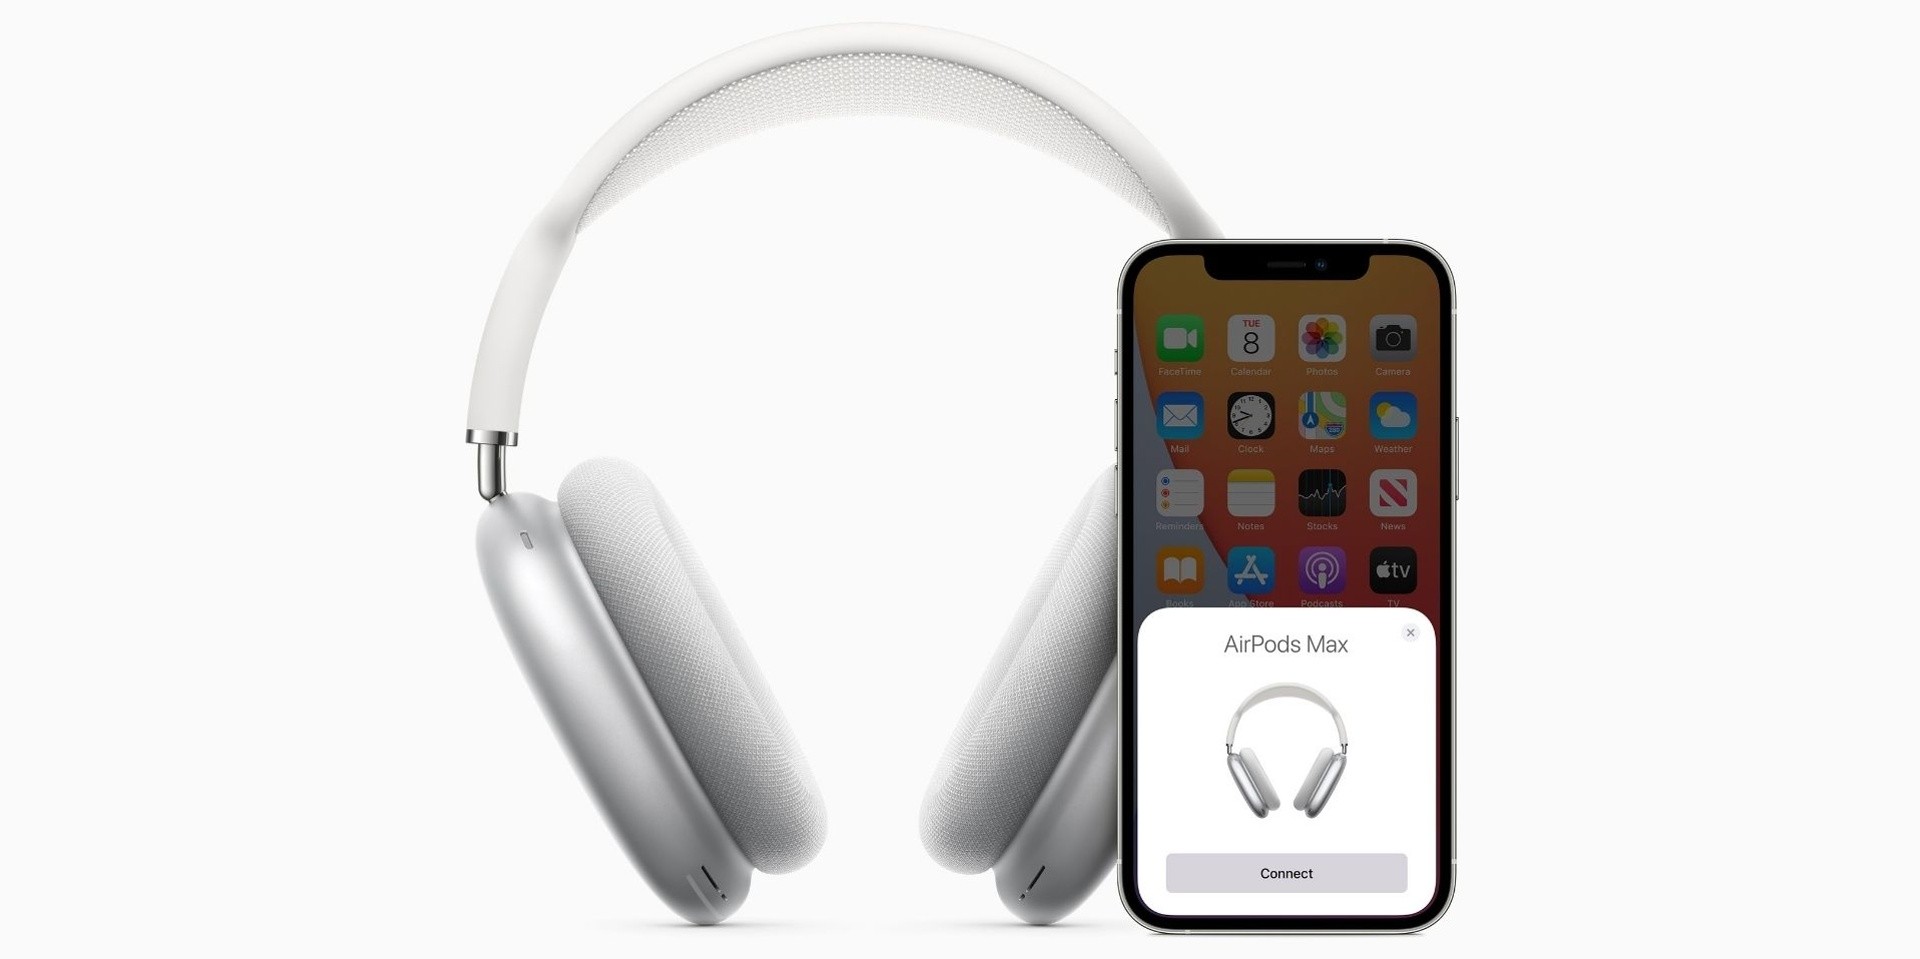 Apple launches new AirPods Max, over-ear headphones "to wirelessly deliver the ultimate personal listening experience" 